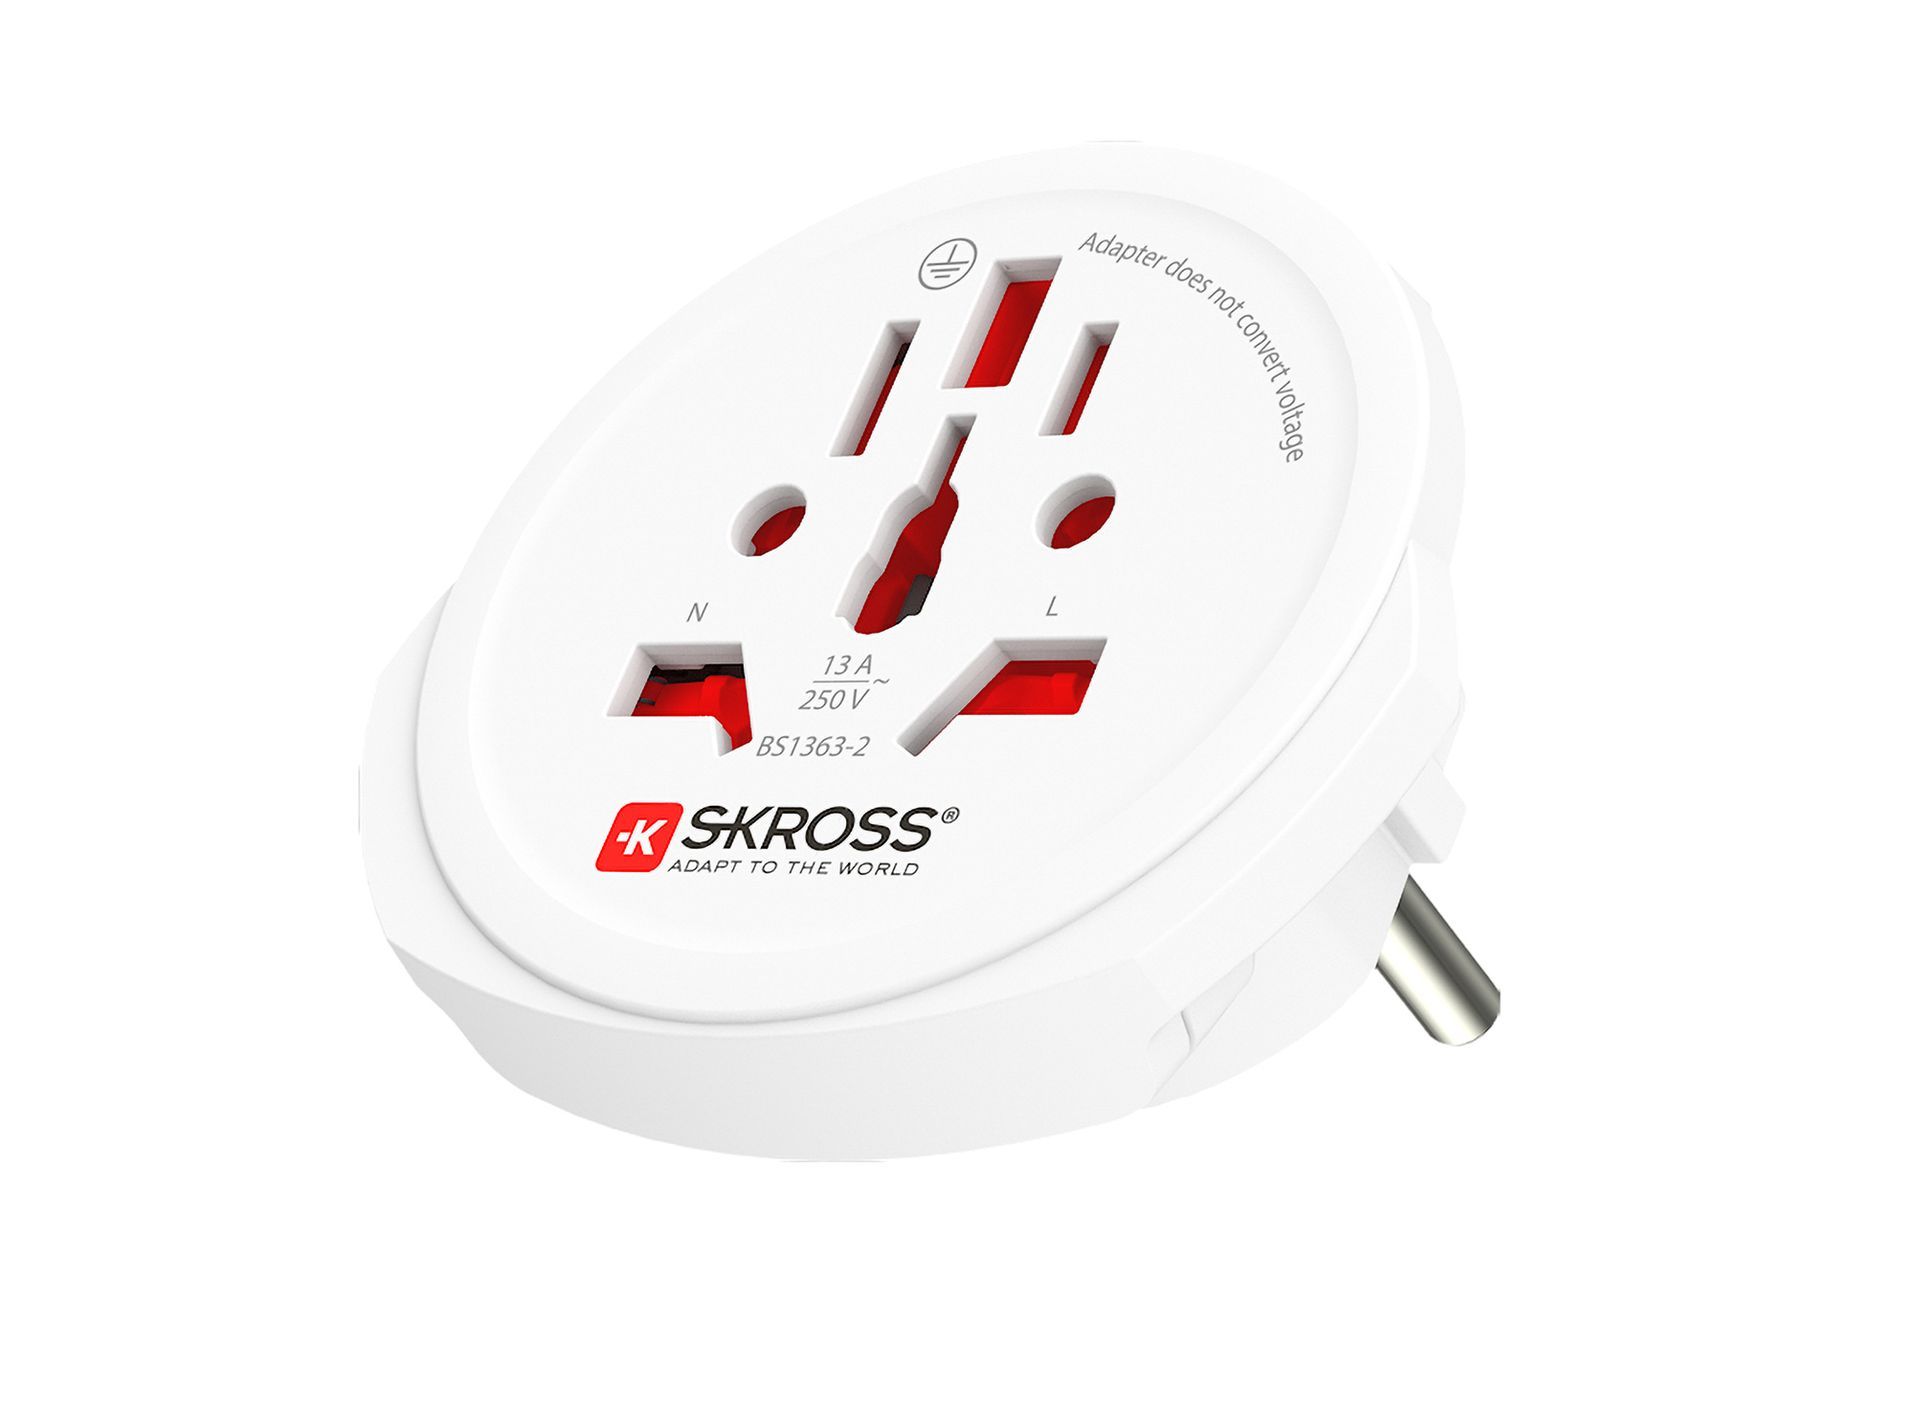 Skross World to Europe travel adapter right side on